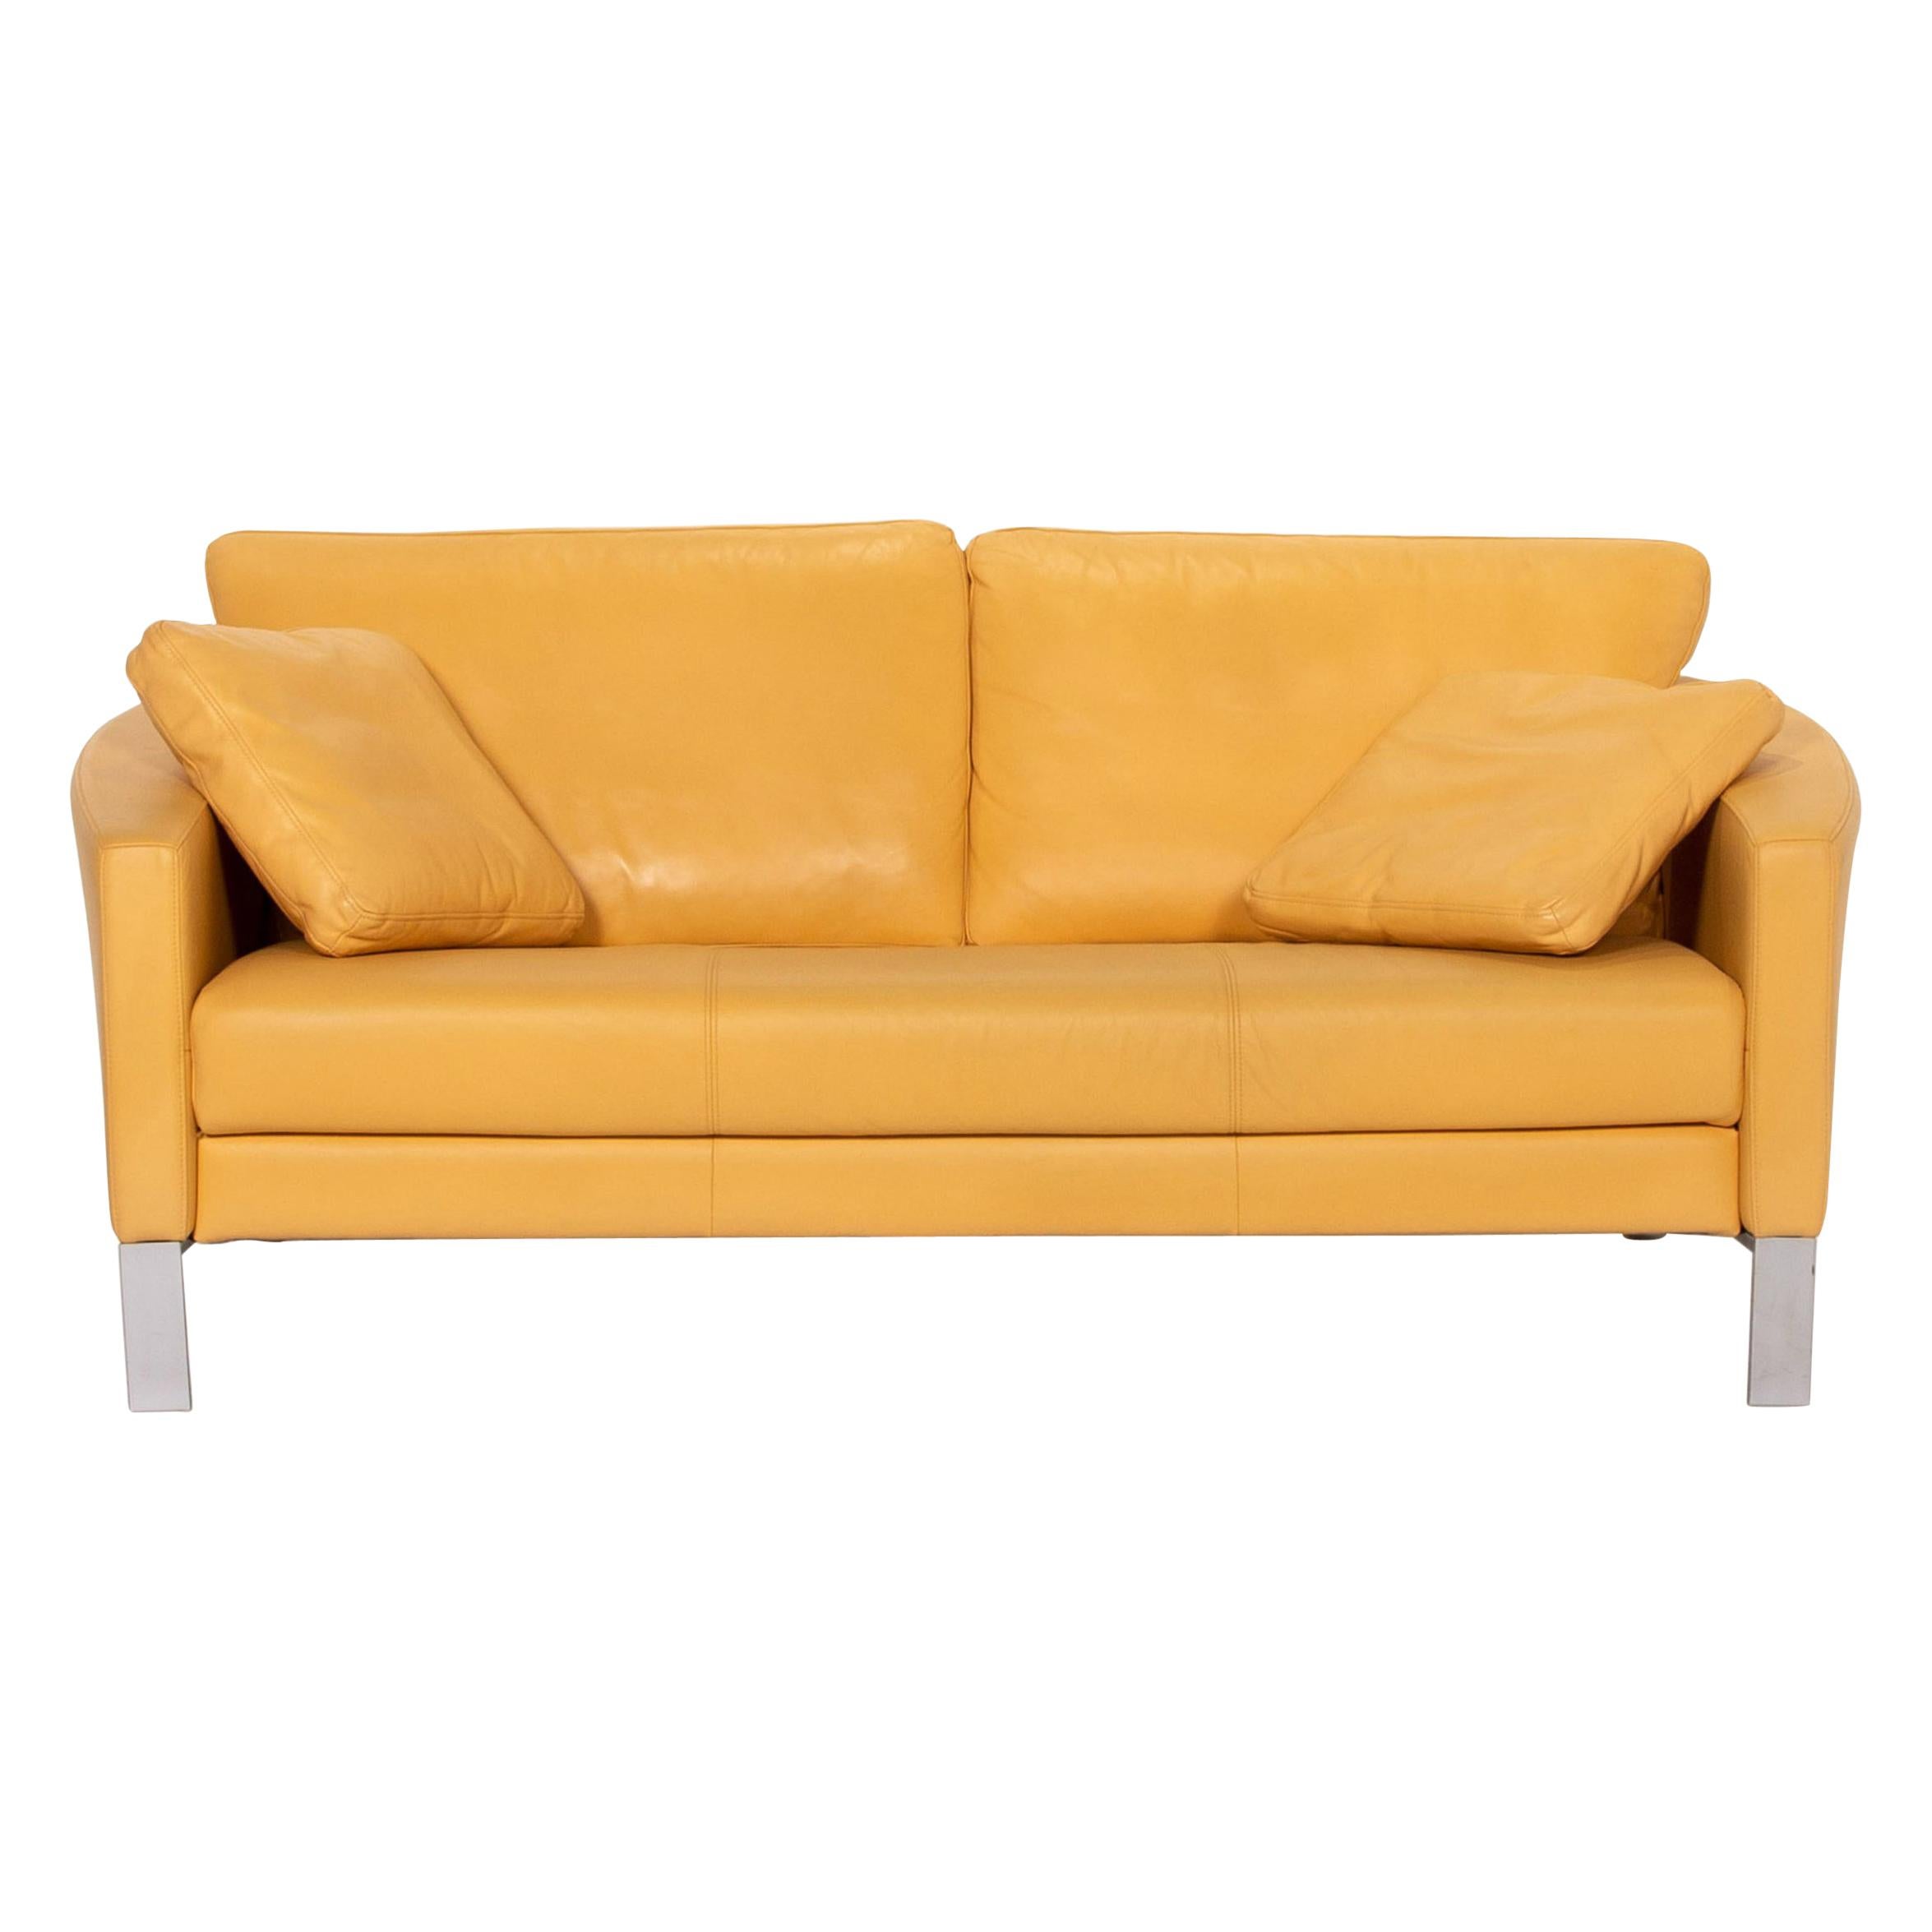 Rolf Benz Leather Sofa Yellow Two-Seat Couch For Sale